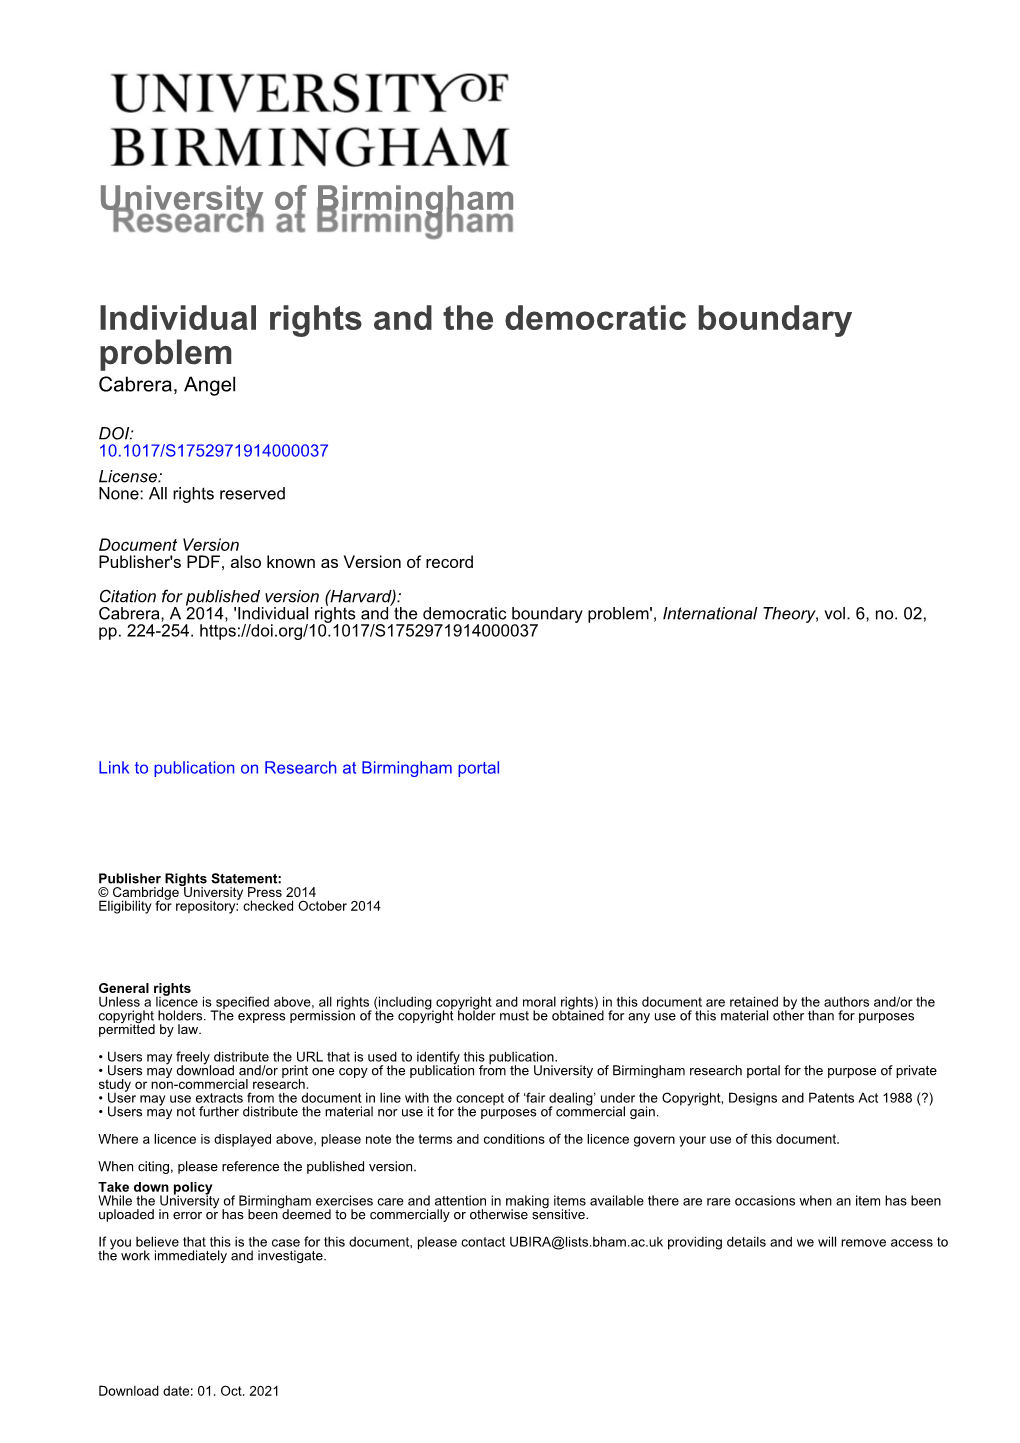 University of Birmingham Individual Rights and the Democratic Boundary